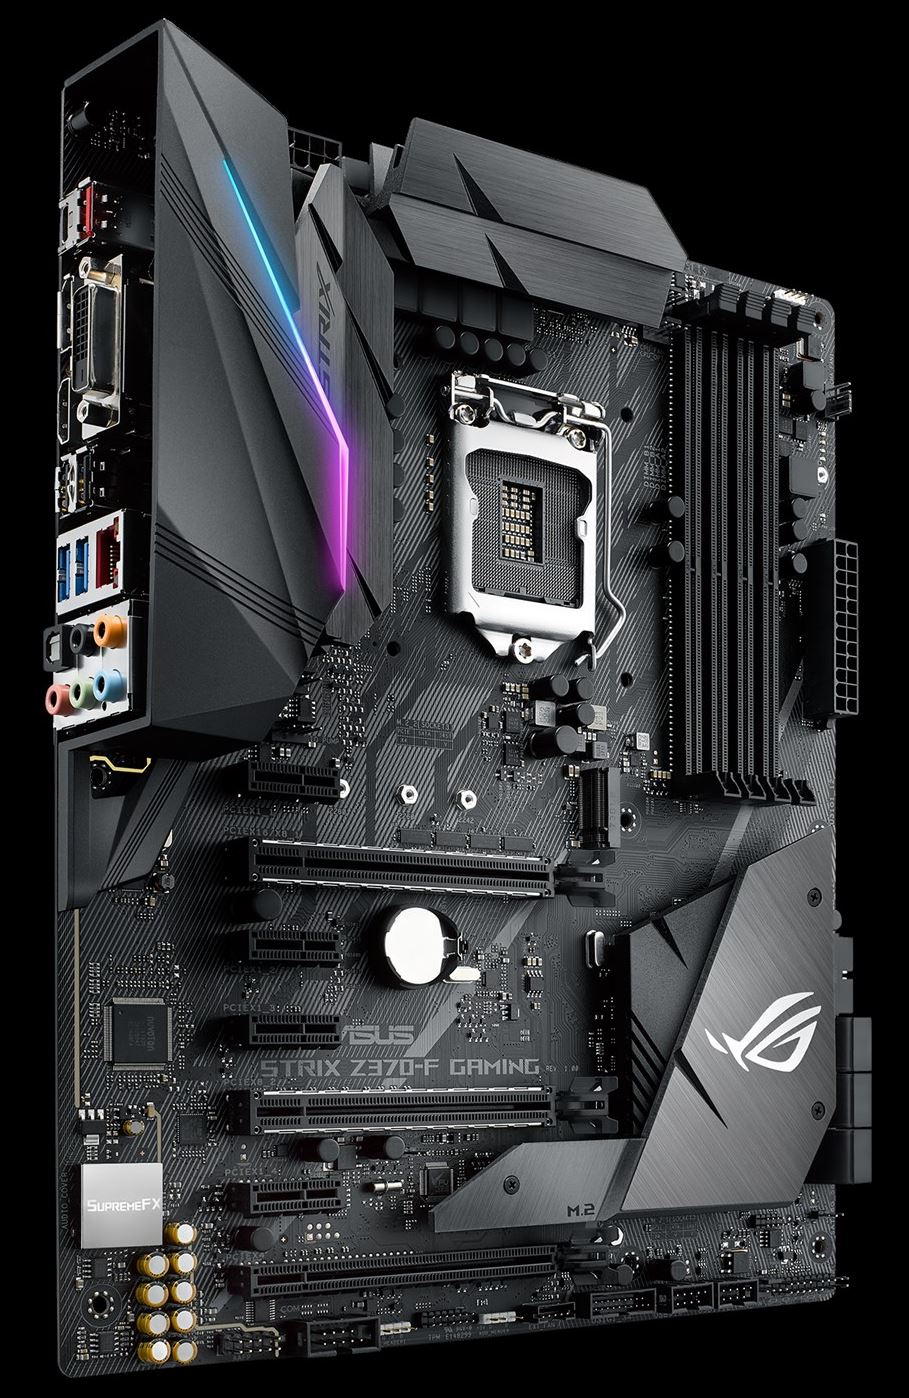 Final Words And Conclusion The Asus Rog Strix Z370 F Gaming Review A 0 Motherboard At 5 1 Ghz